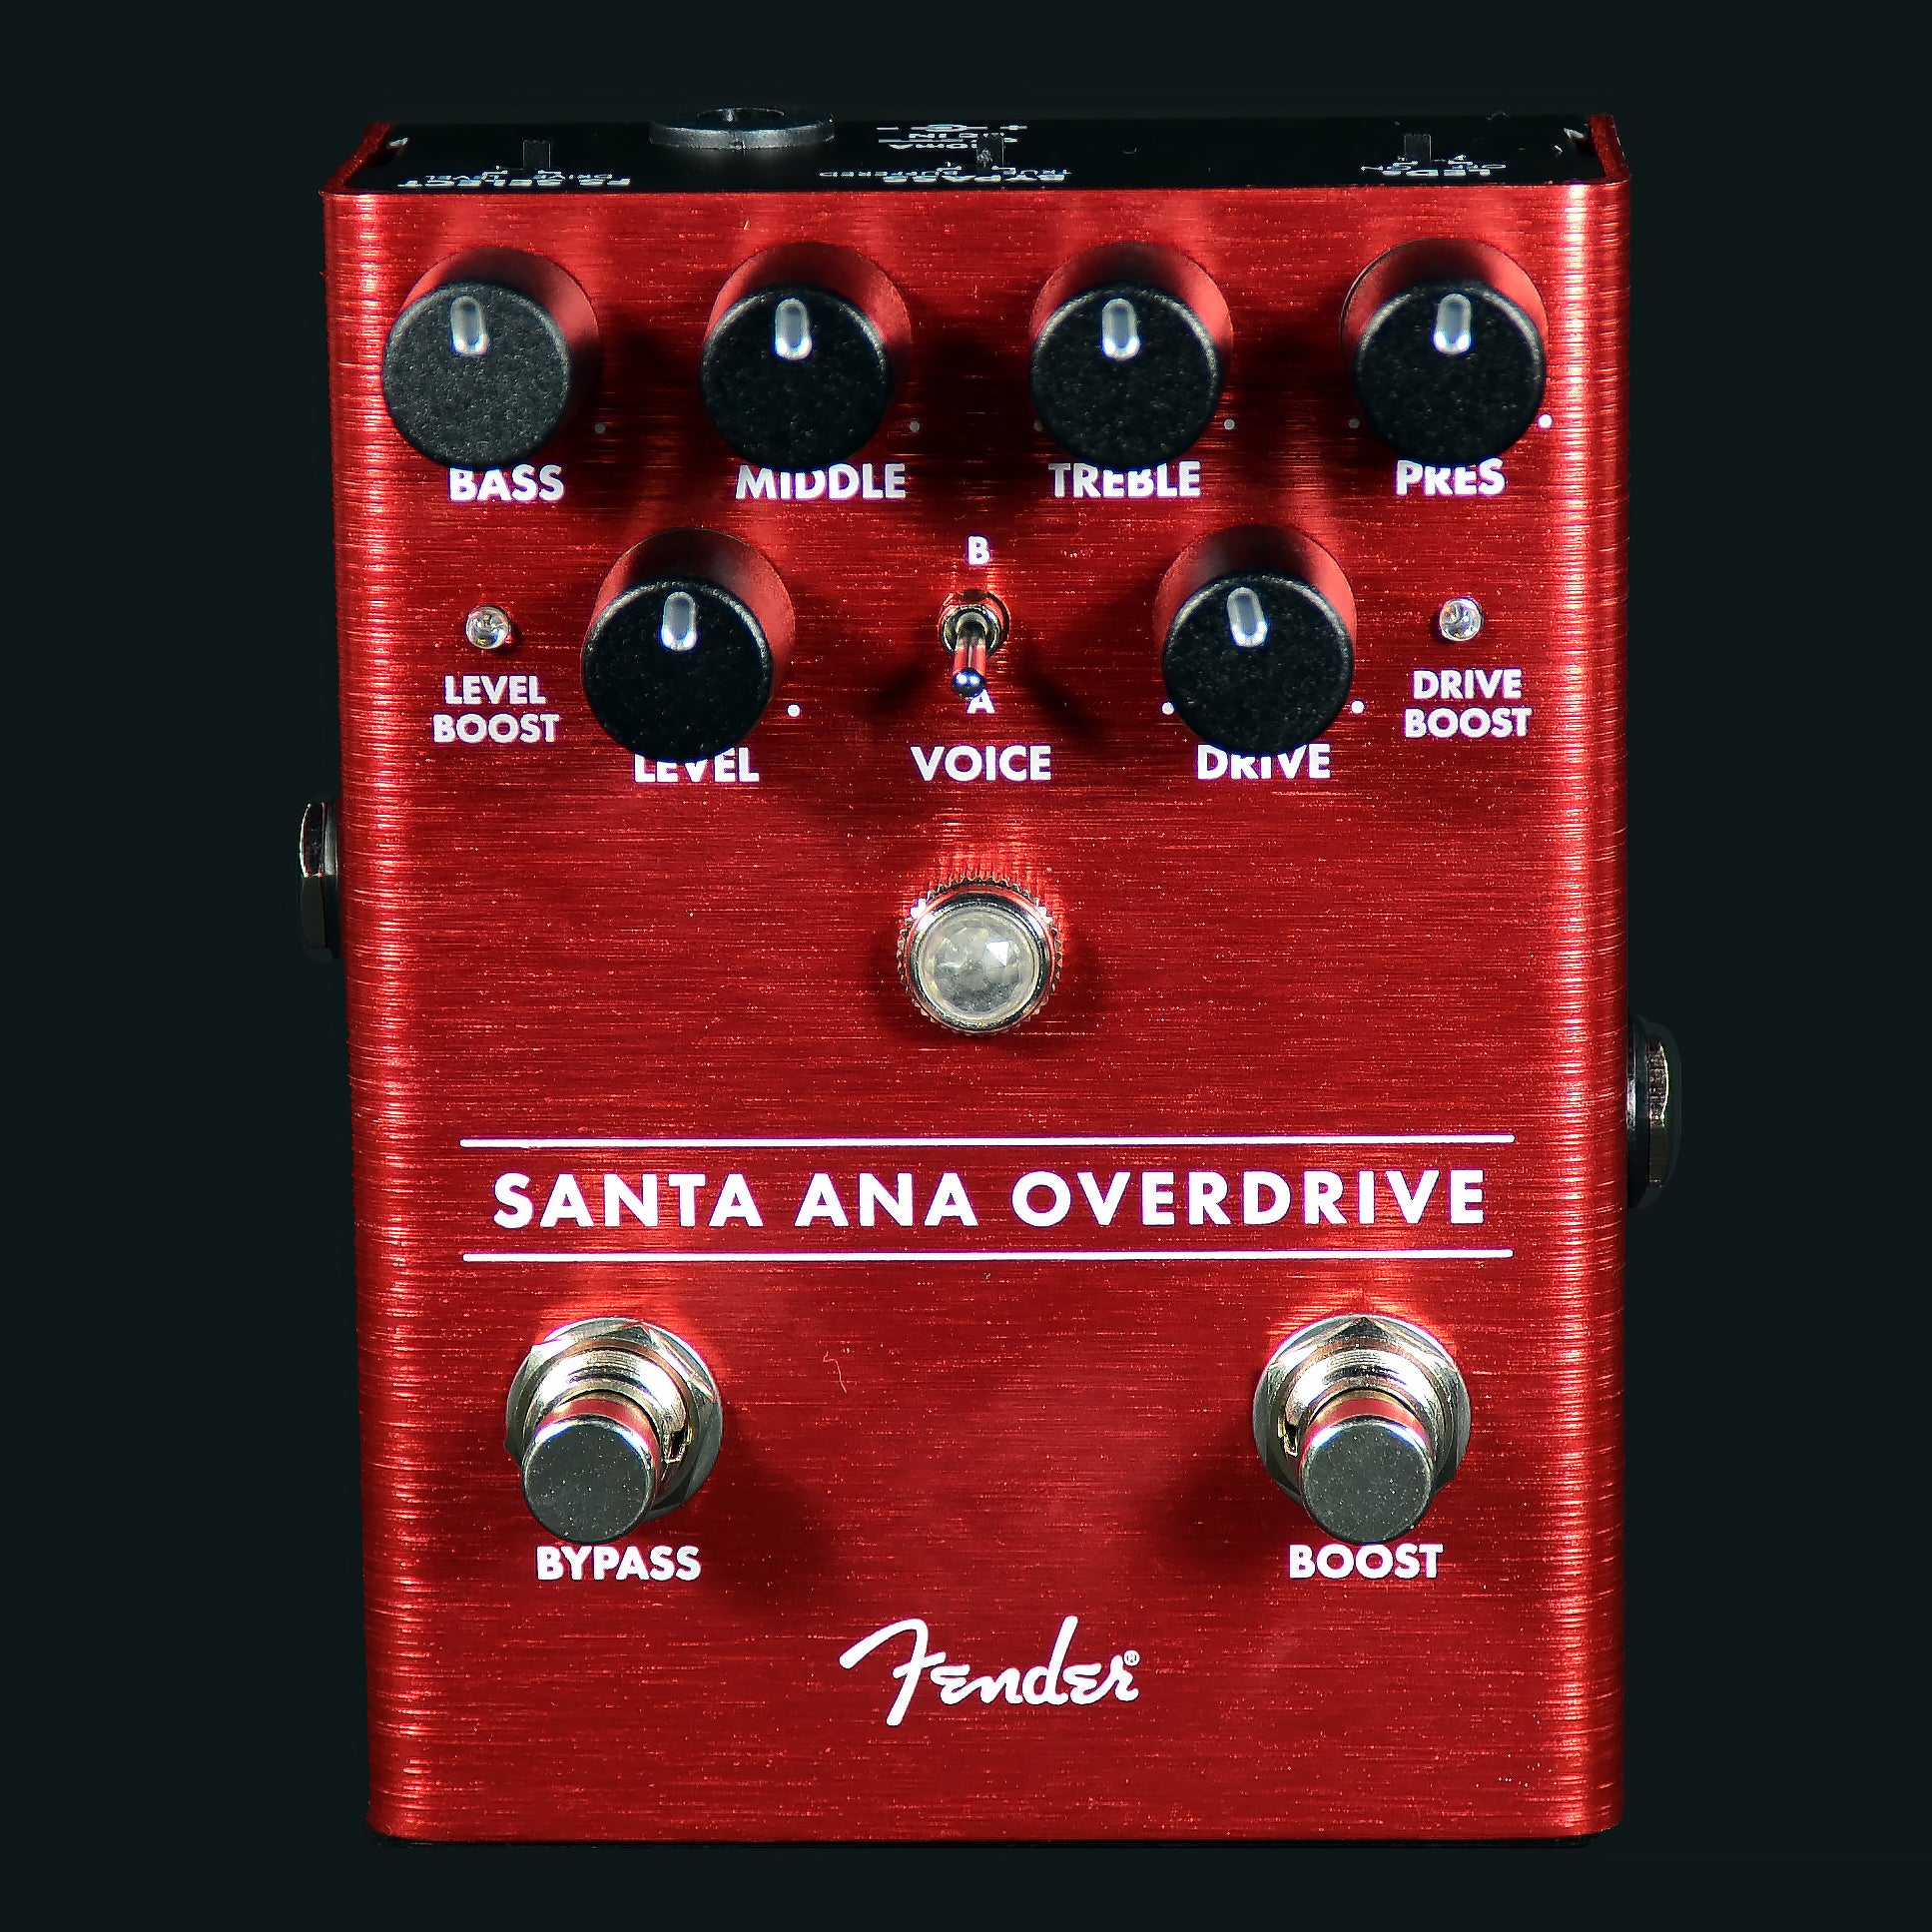 Fender Santa Ana Overdrive Effects Pedal Bass Mid Treble Pres